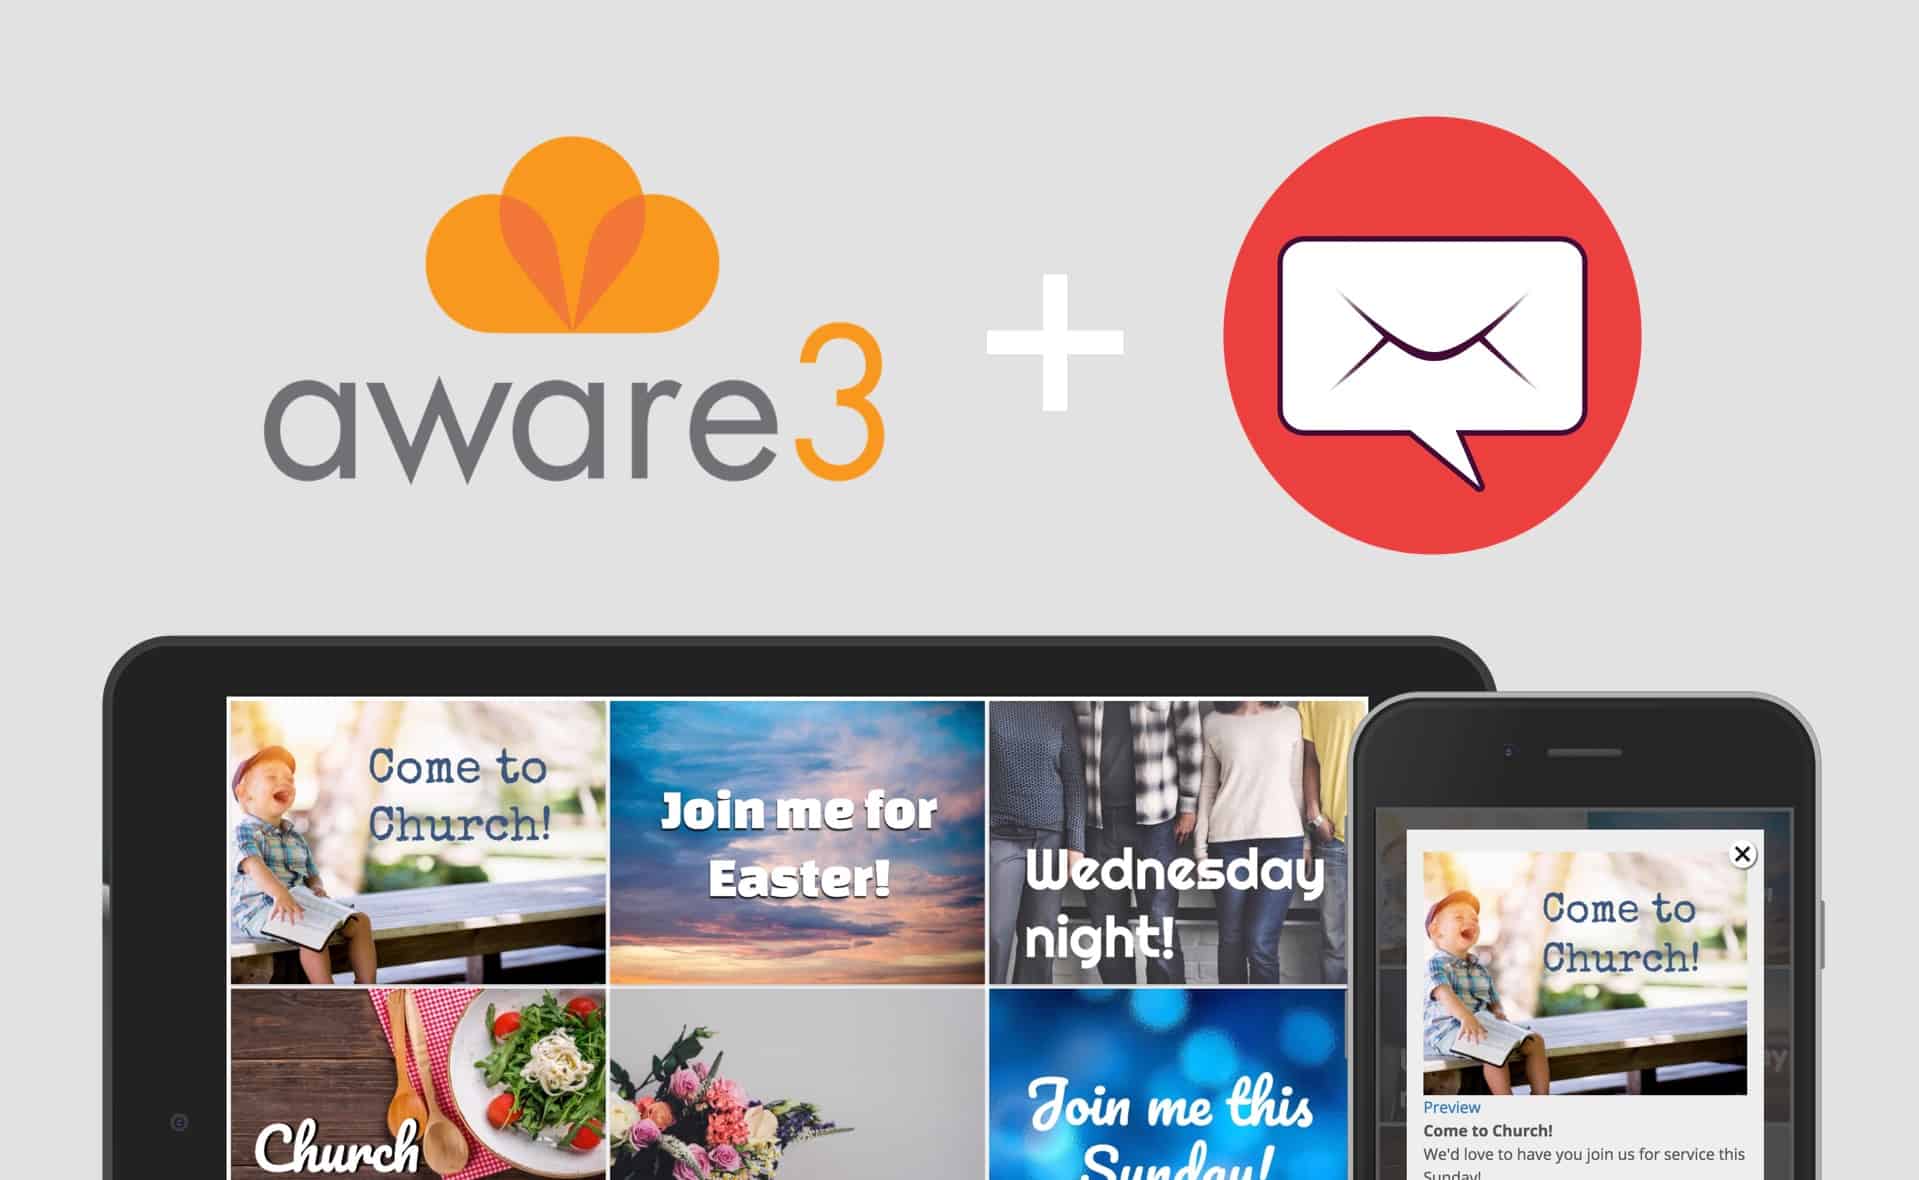 How to add ecards to your Aware3 church app